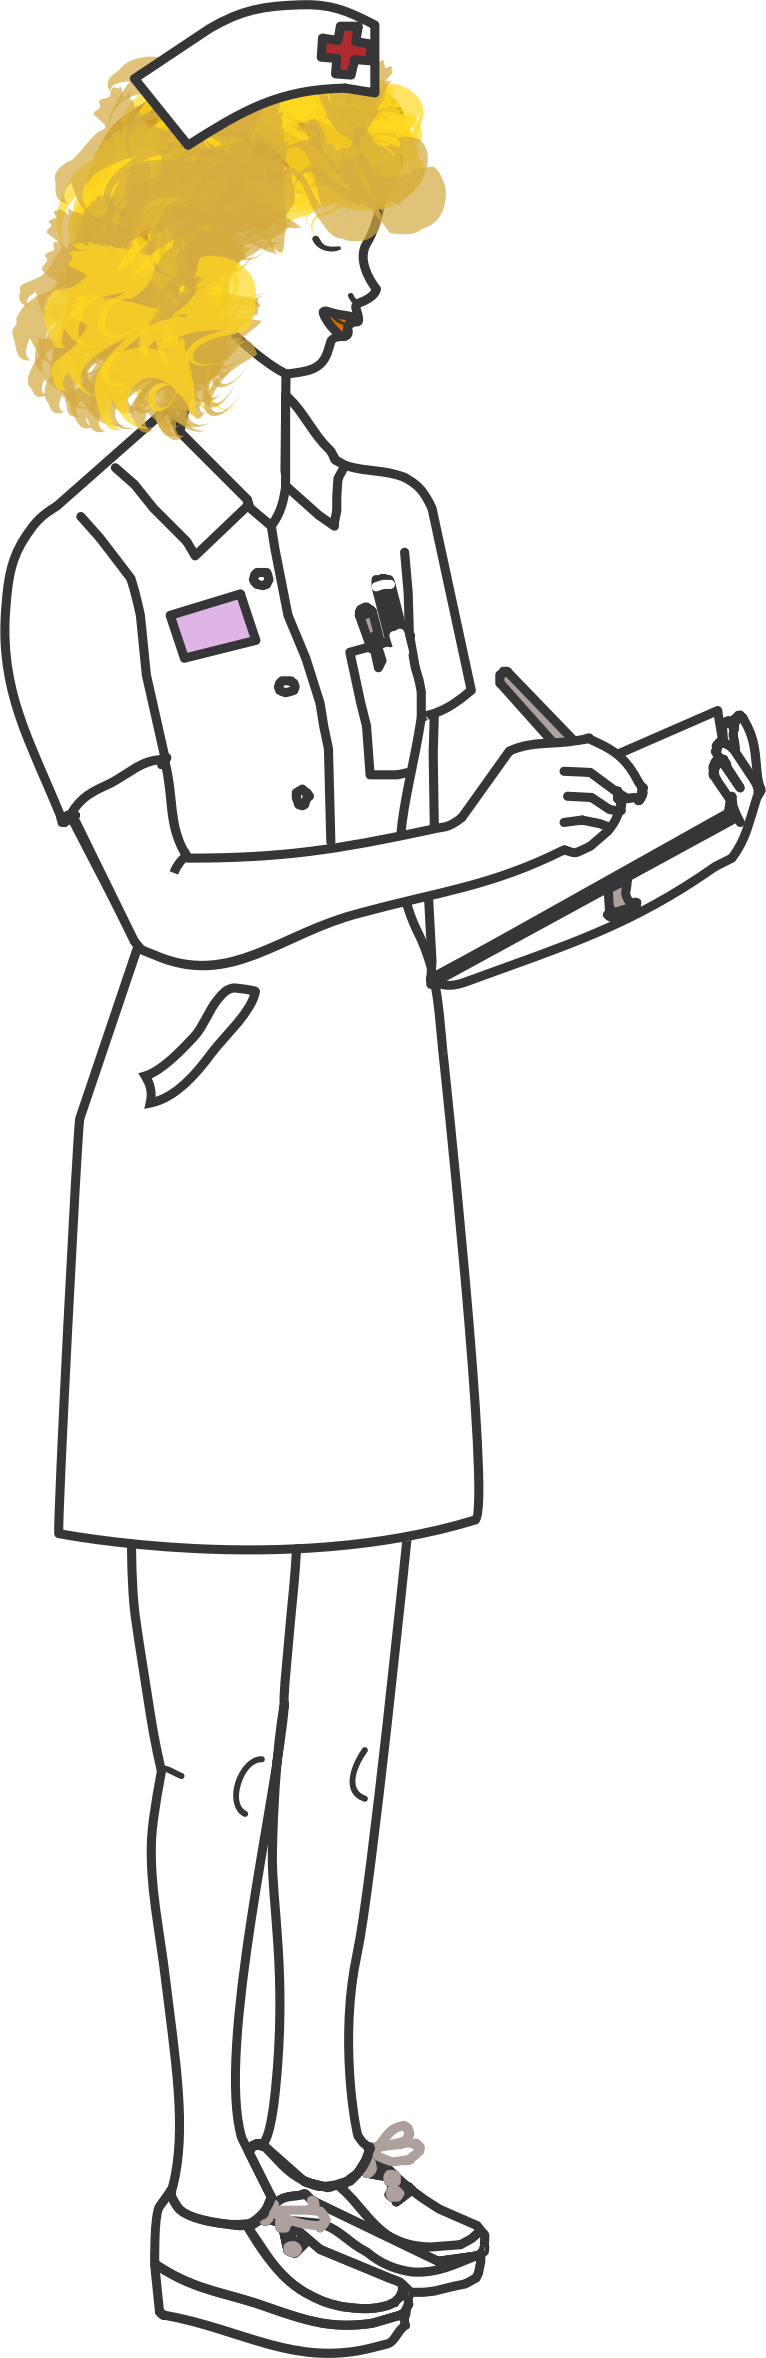 Big image png. Nurse clipart black and white